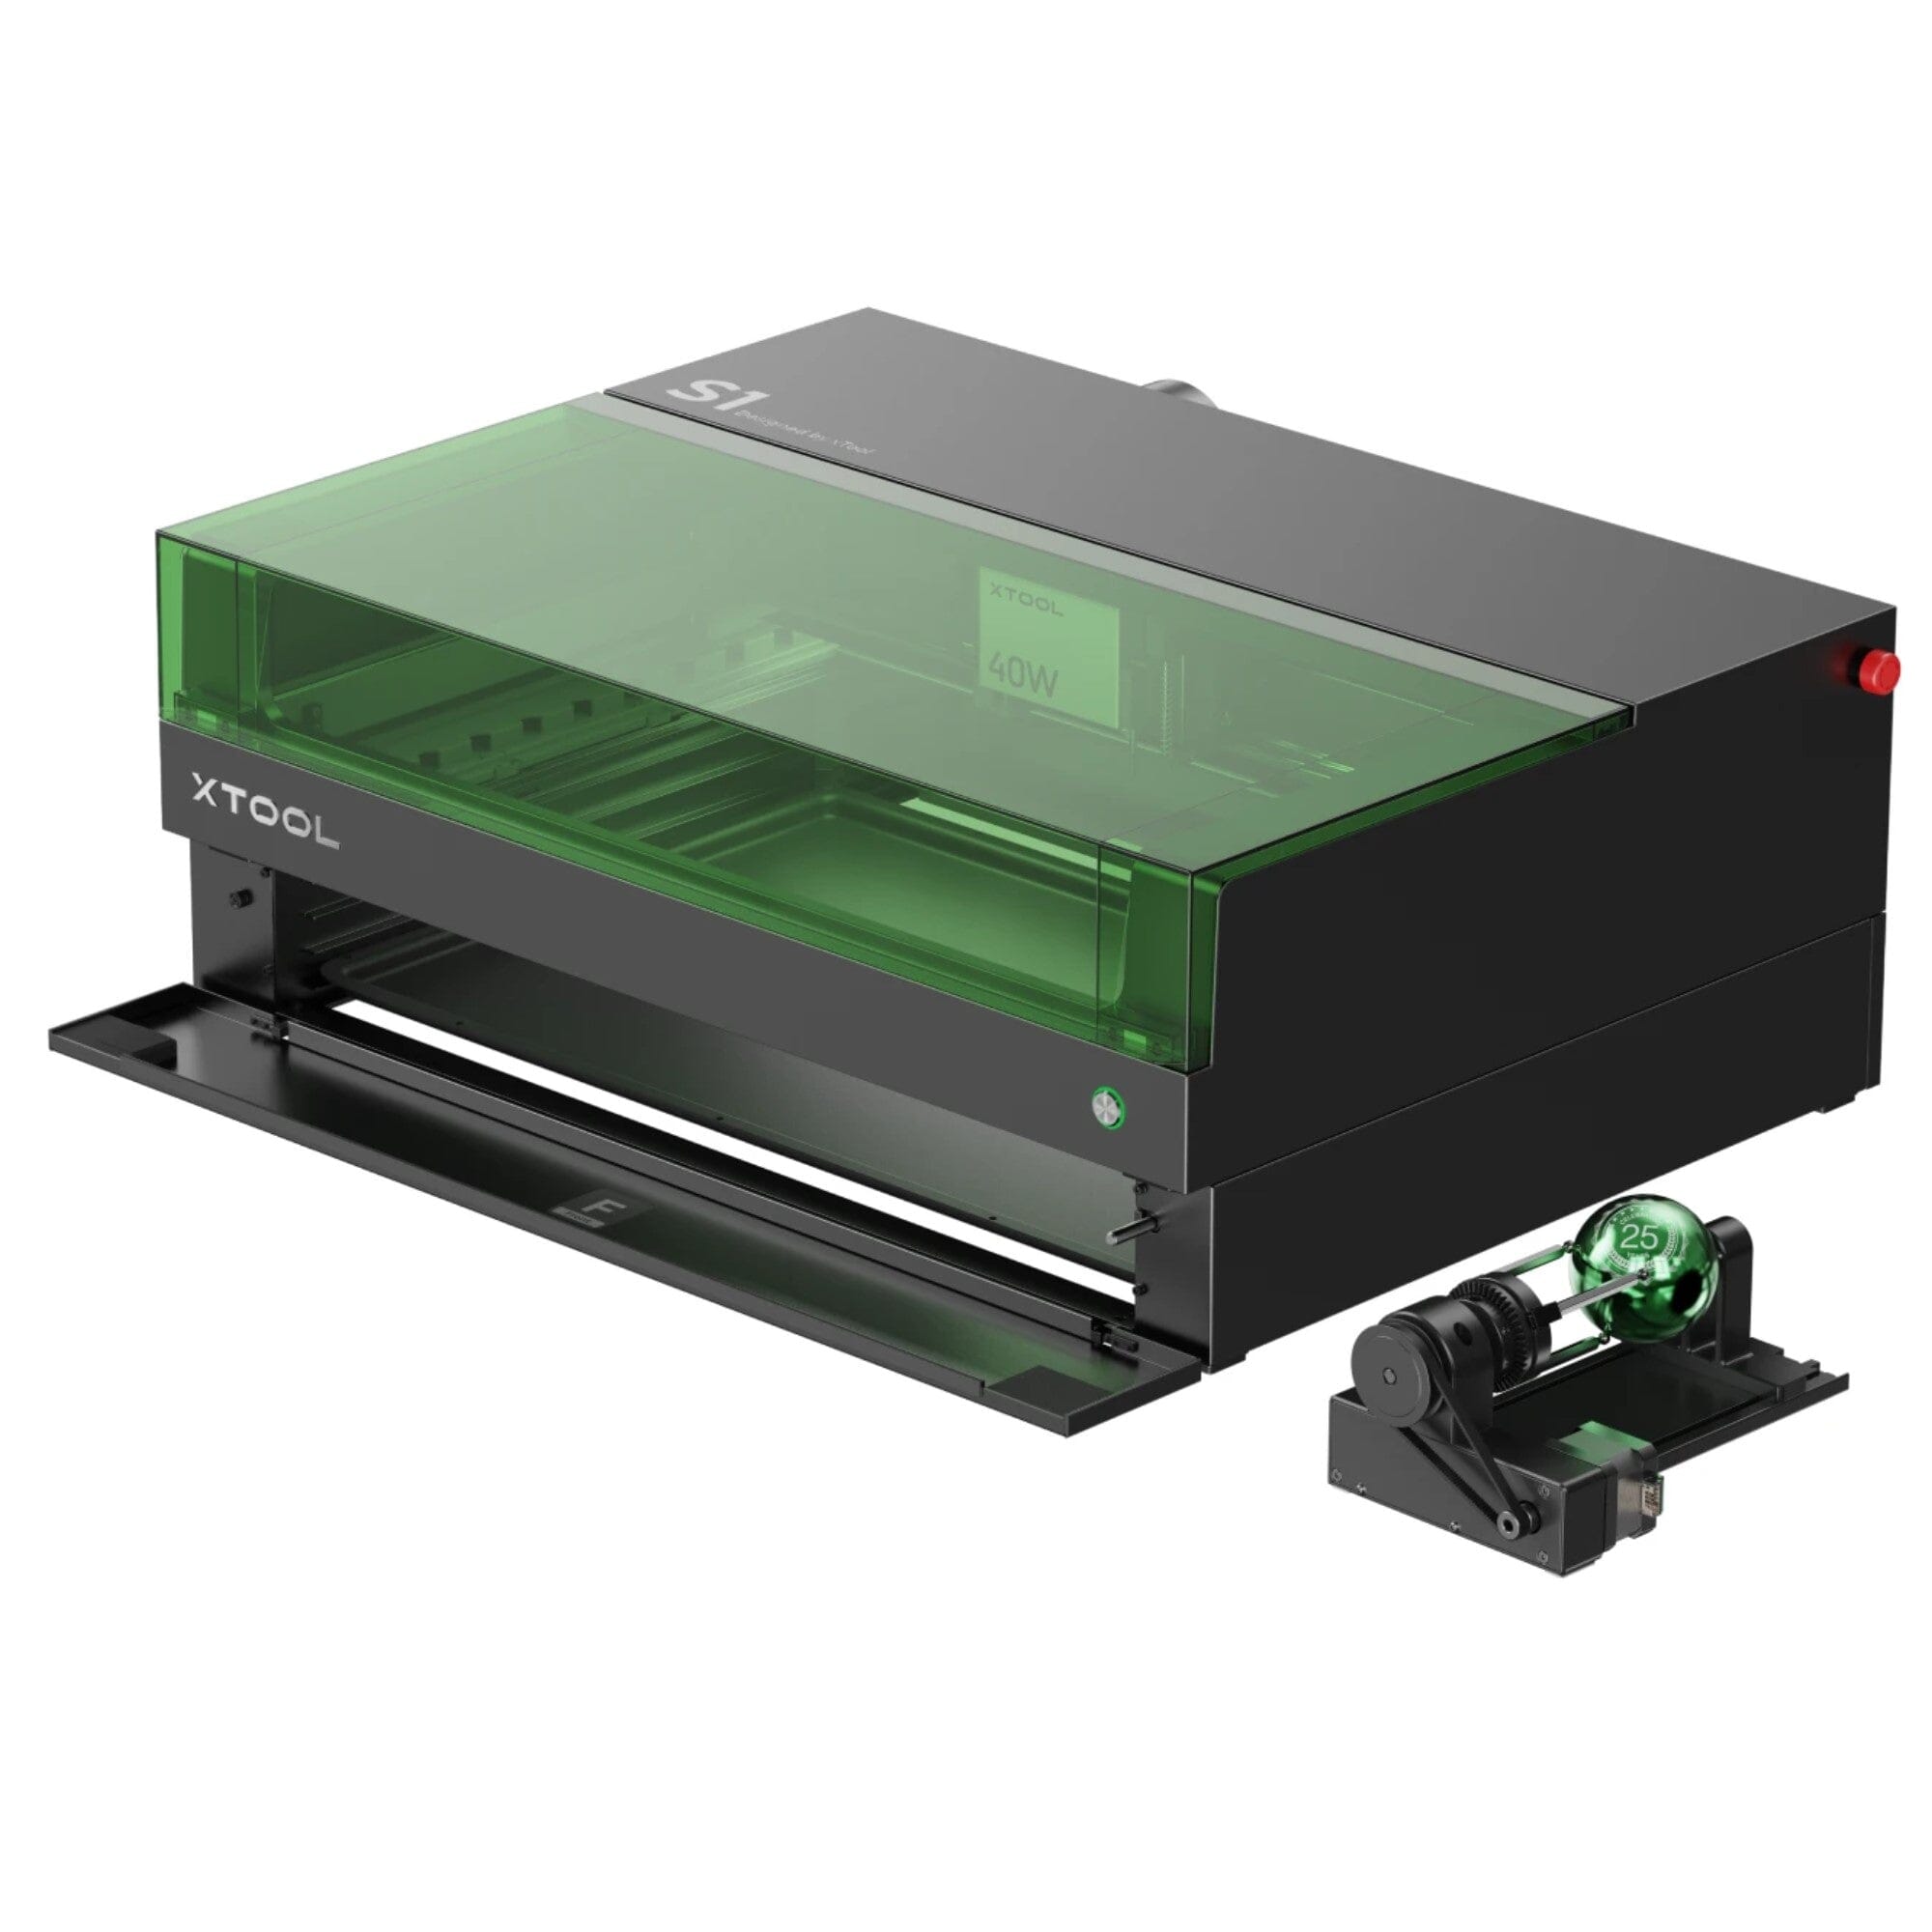 Meet xTool S1, the world's first 40W enclosed diode laser engraver 